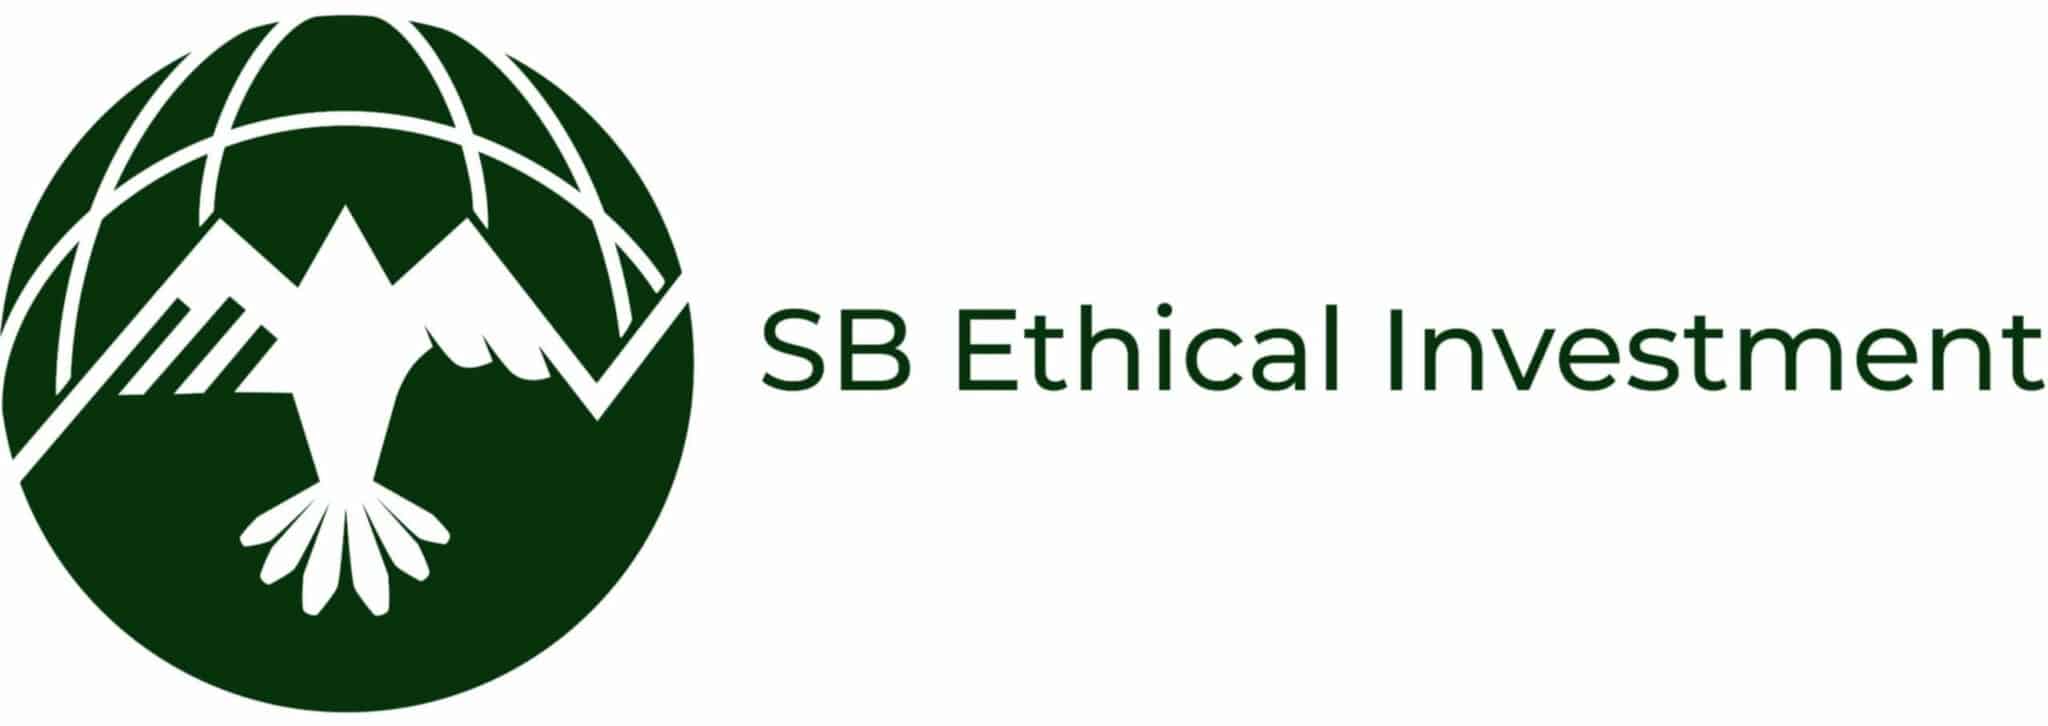 SB Ethical Investment